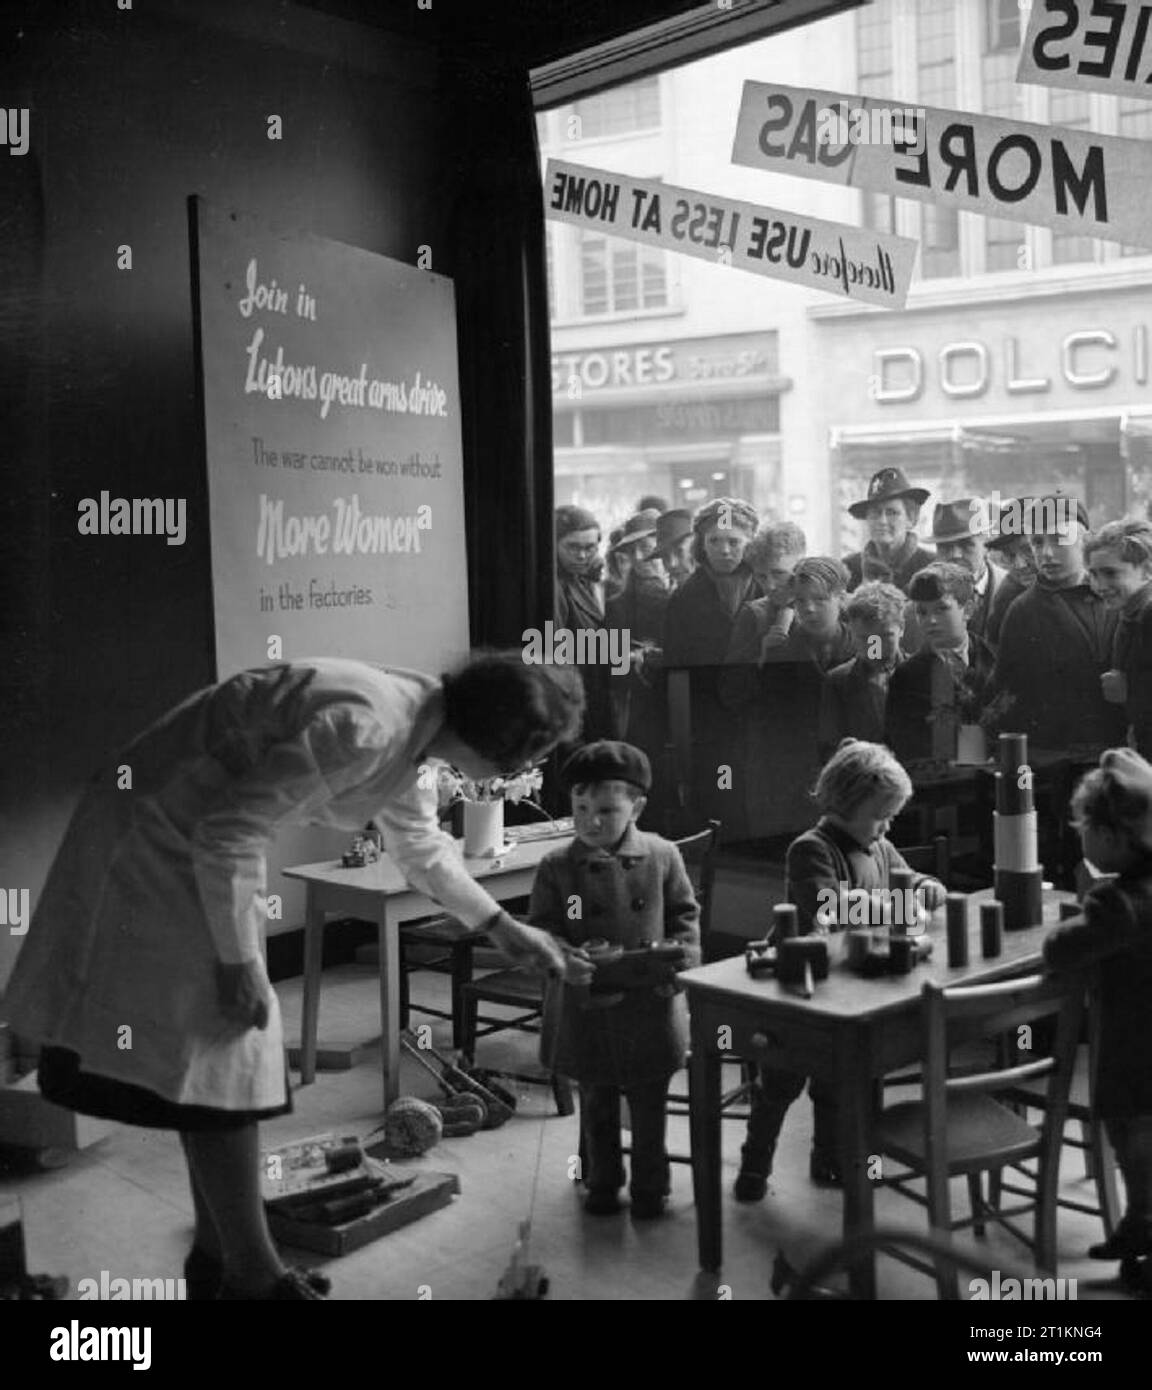 Ministry of Information Exhibitions during the Second World War, Luton, Bedfordshire, England, UK, 1942 A corner of the Women's War Work exhibition in Luton. In the shop window, children play, as a group of women and older children crowd outside to look in at them through the window. A sign reads: 'Join in Luton's great arms drive. The war cannot be won without more women in the factories'. Stock Photo